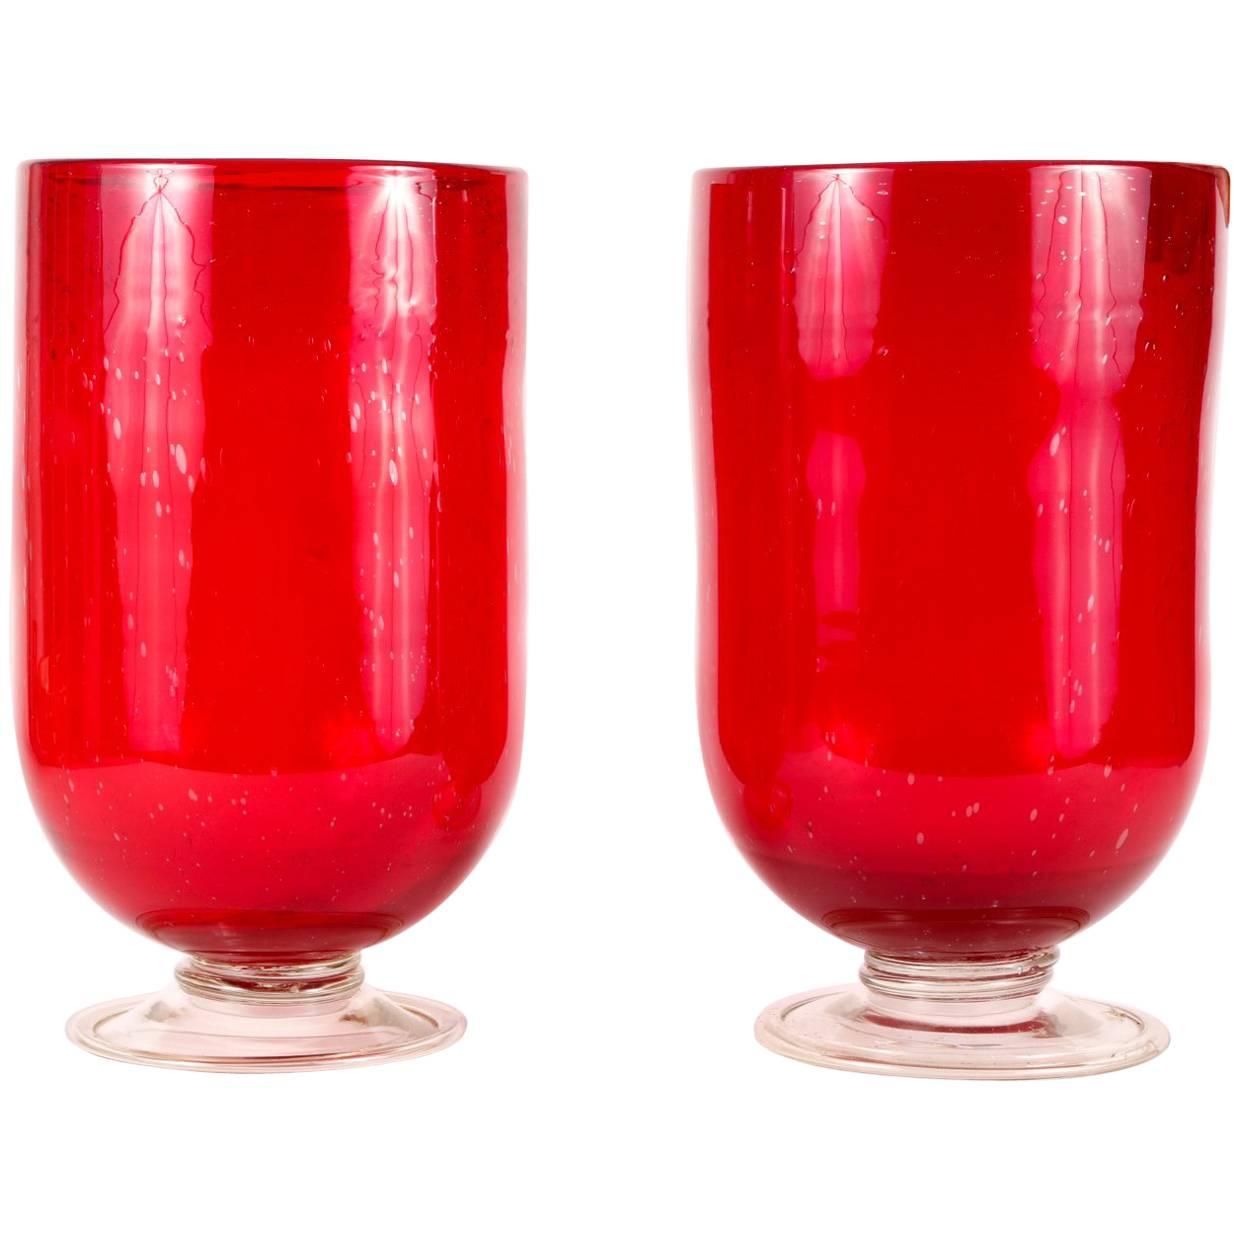 Cranberry Red Hurricane Lamps / Vases by Biot